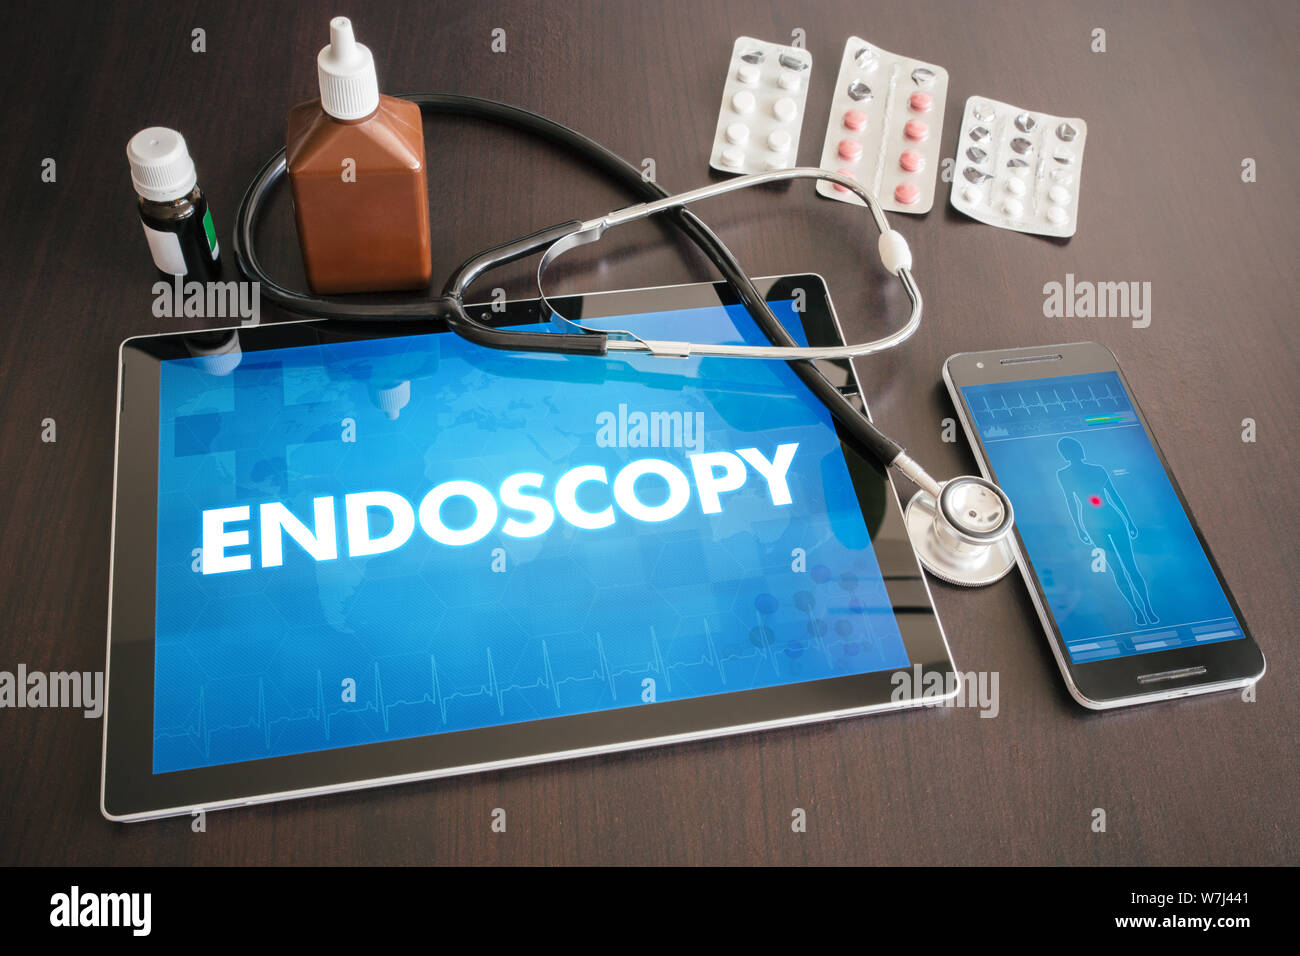 Endoscopy (gastrointestinal disease related) diagnosis medical concept on tablet screen with stethoscope. Stock Photo